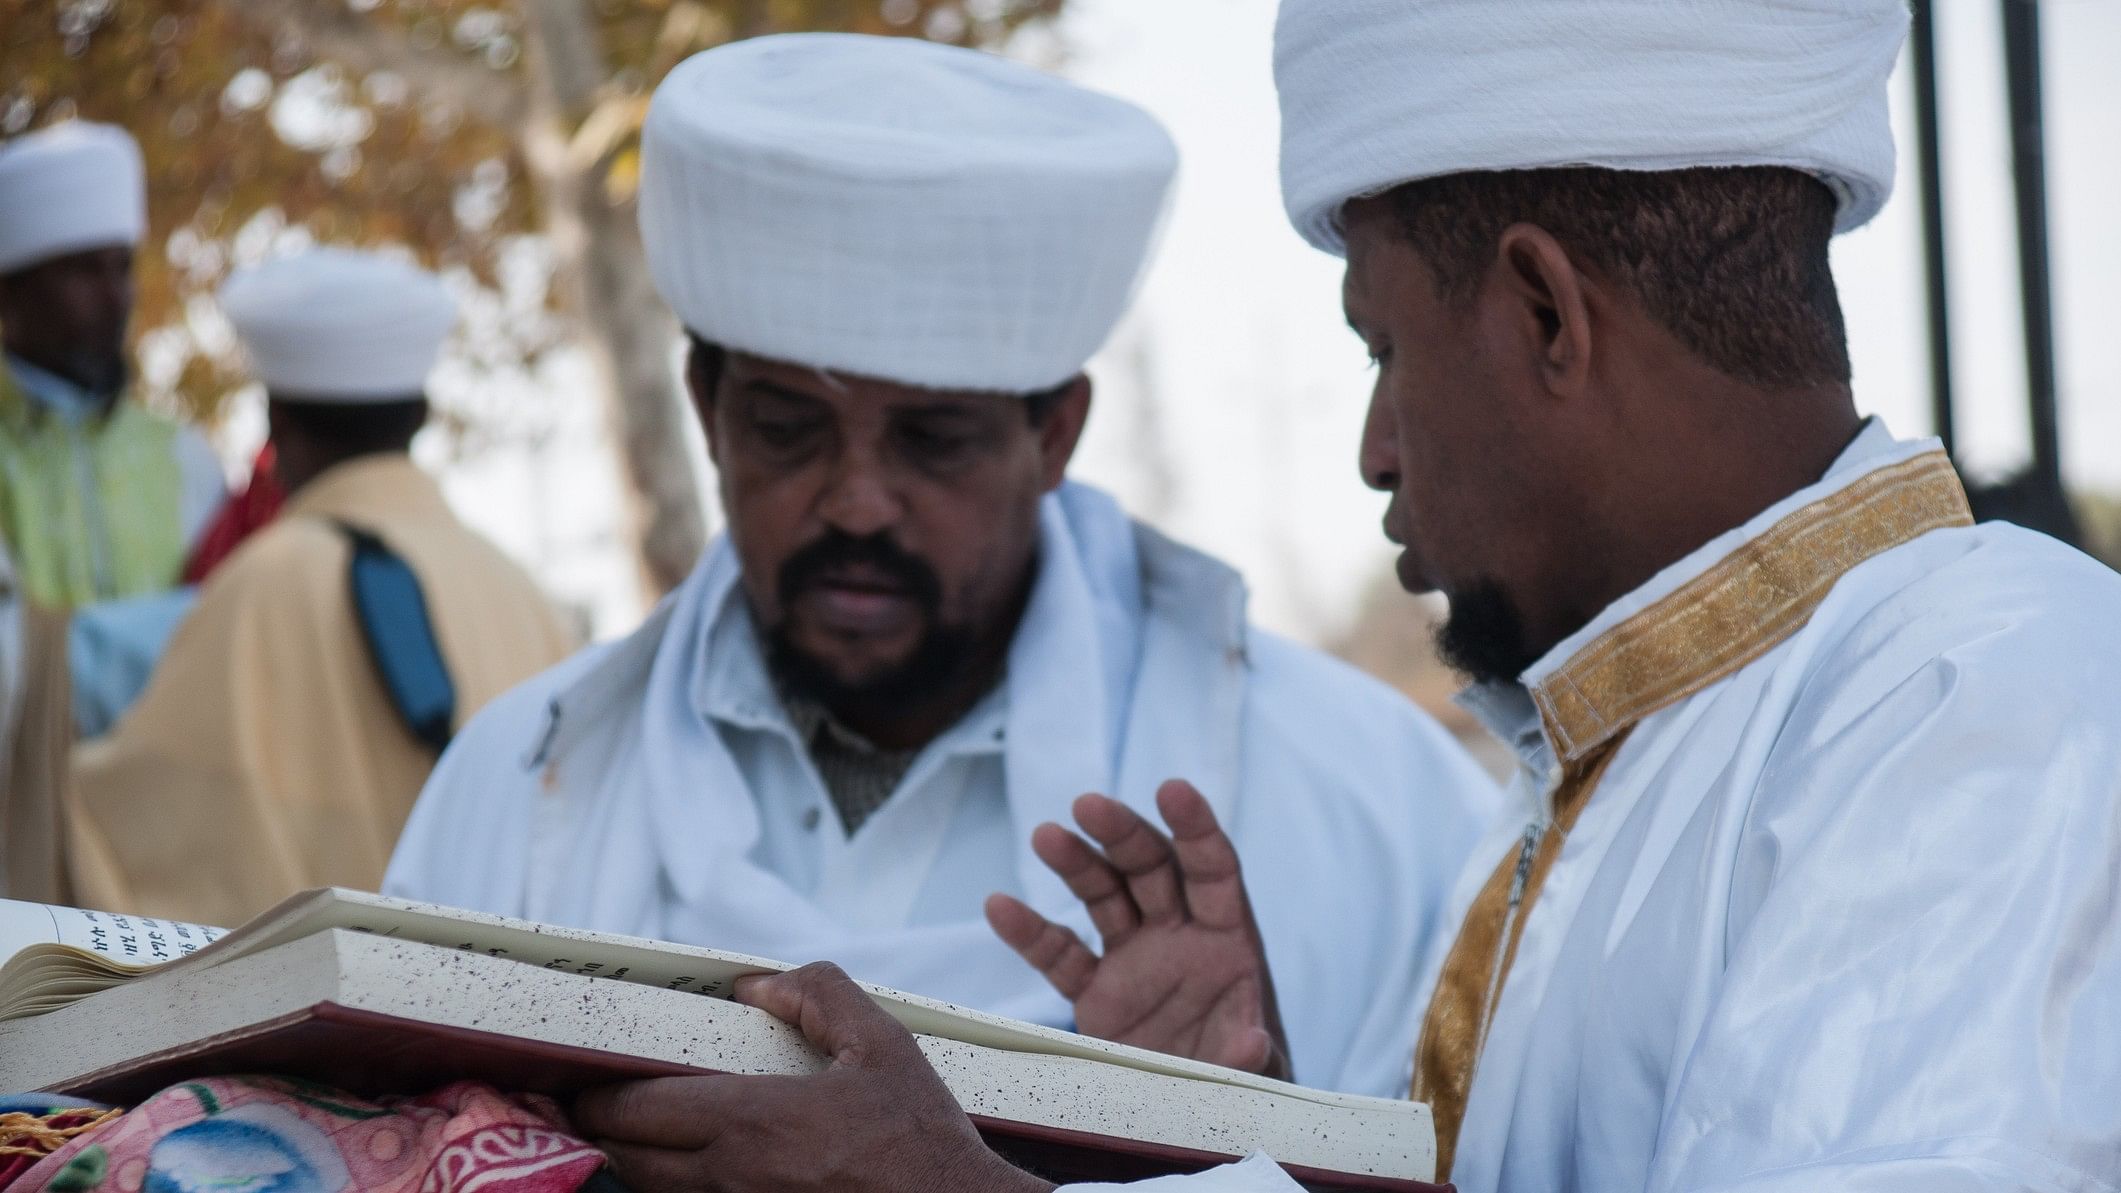 <div class="paragraphs"><p>Representative image showing&nbsp;Kessim, religious leaders of the Ethiopian Jews, prepare for the Sigd prayers in Jerusalem, Israel. The Sigd is an annual holiday of the Ethiopian Jews.</p></div>